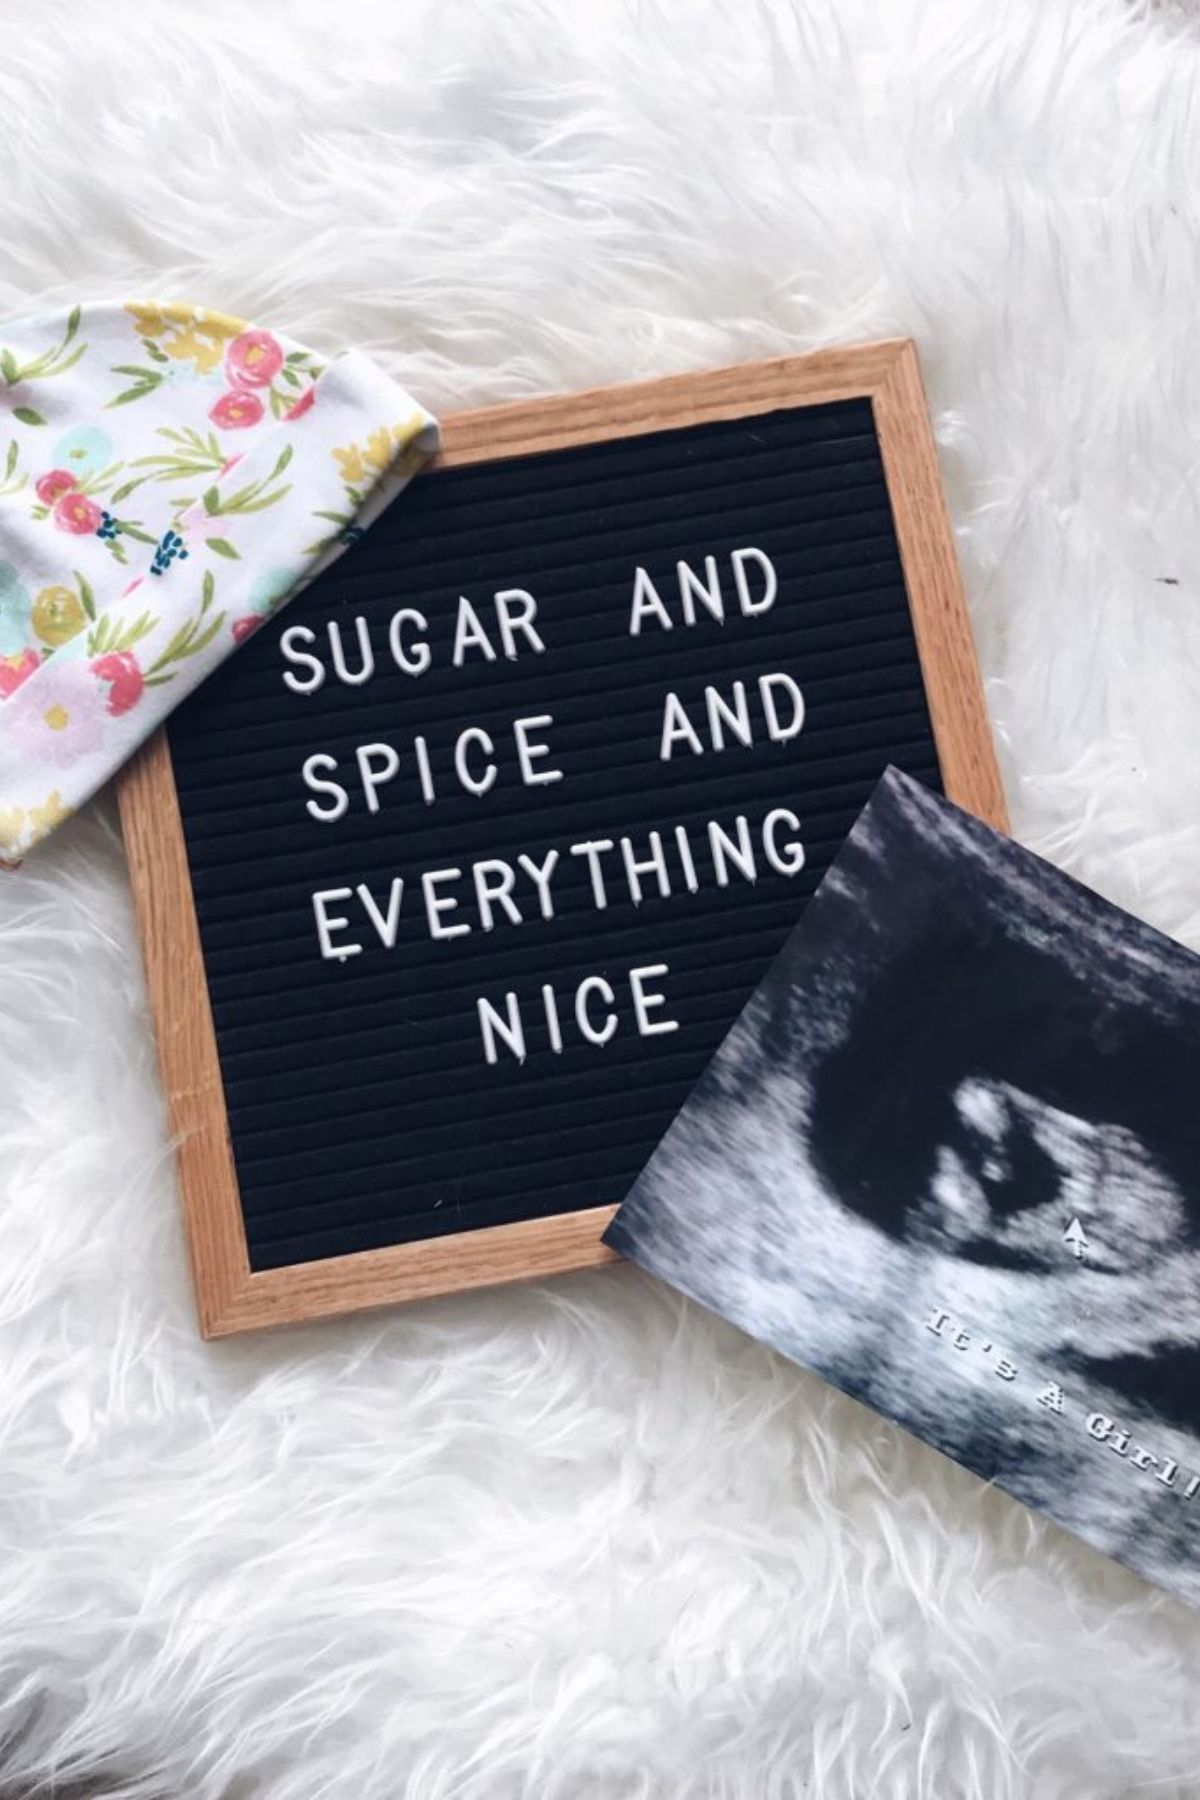 An ultrasound picture next to a sign that says sugar and spice and everything nice.